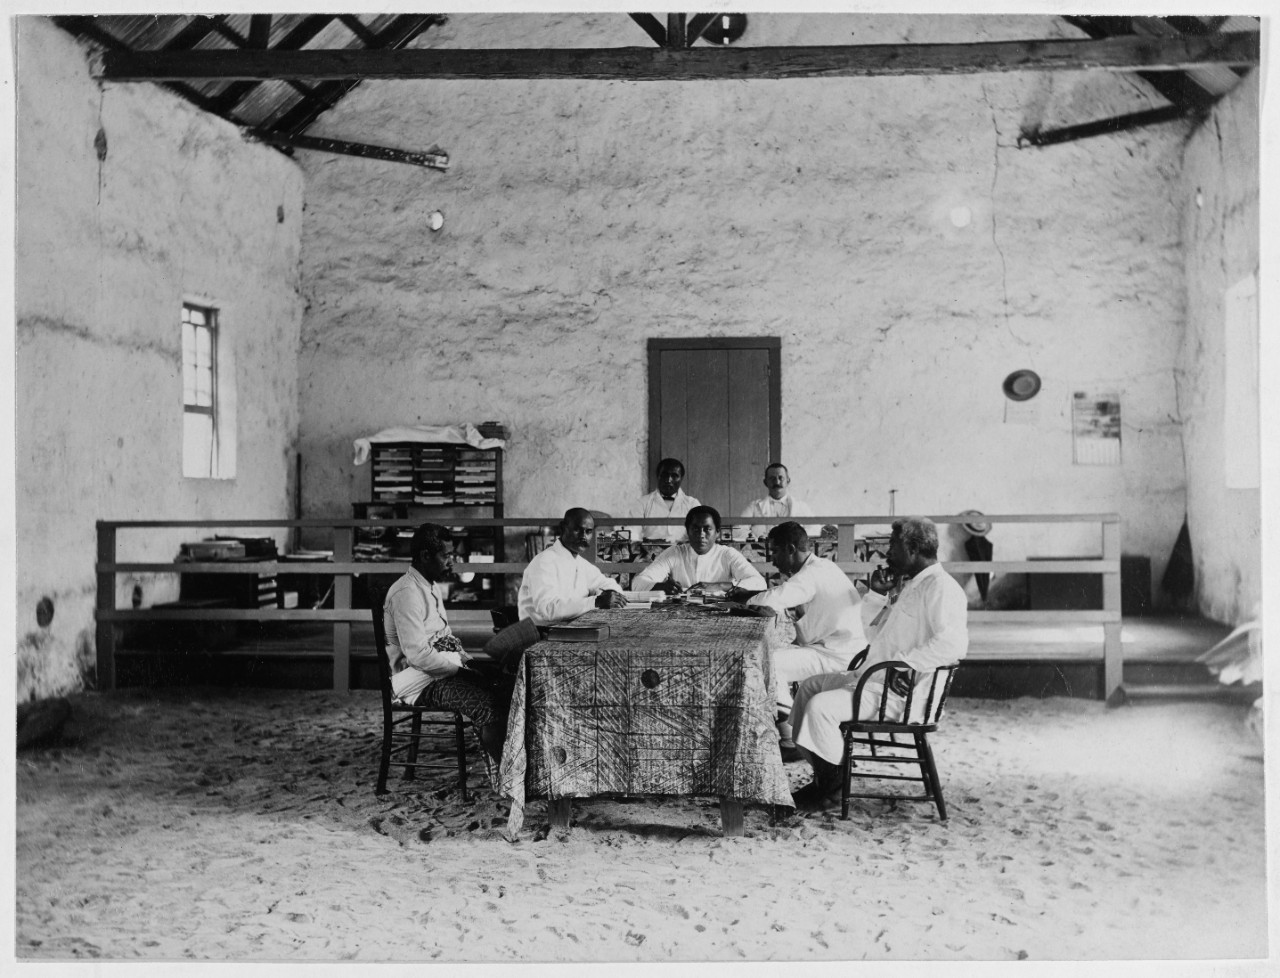 District court in session, Pago Pago, Samoa, 1900-1901.